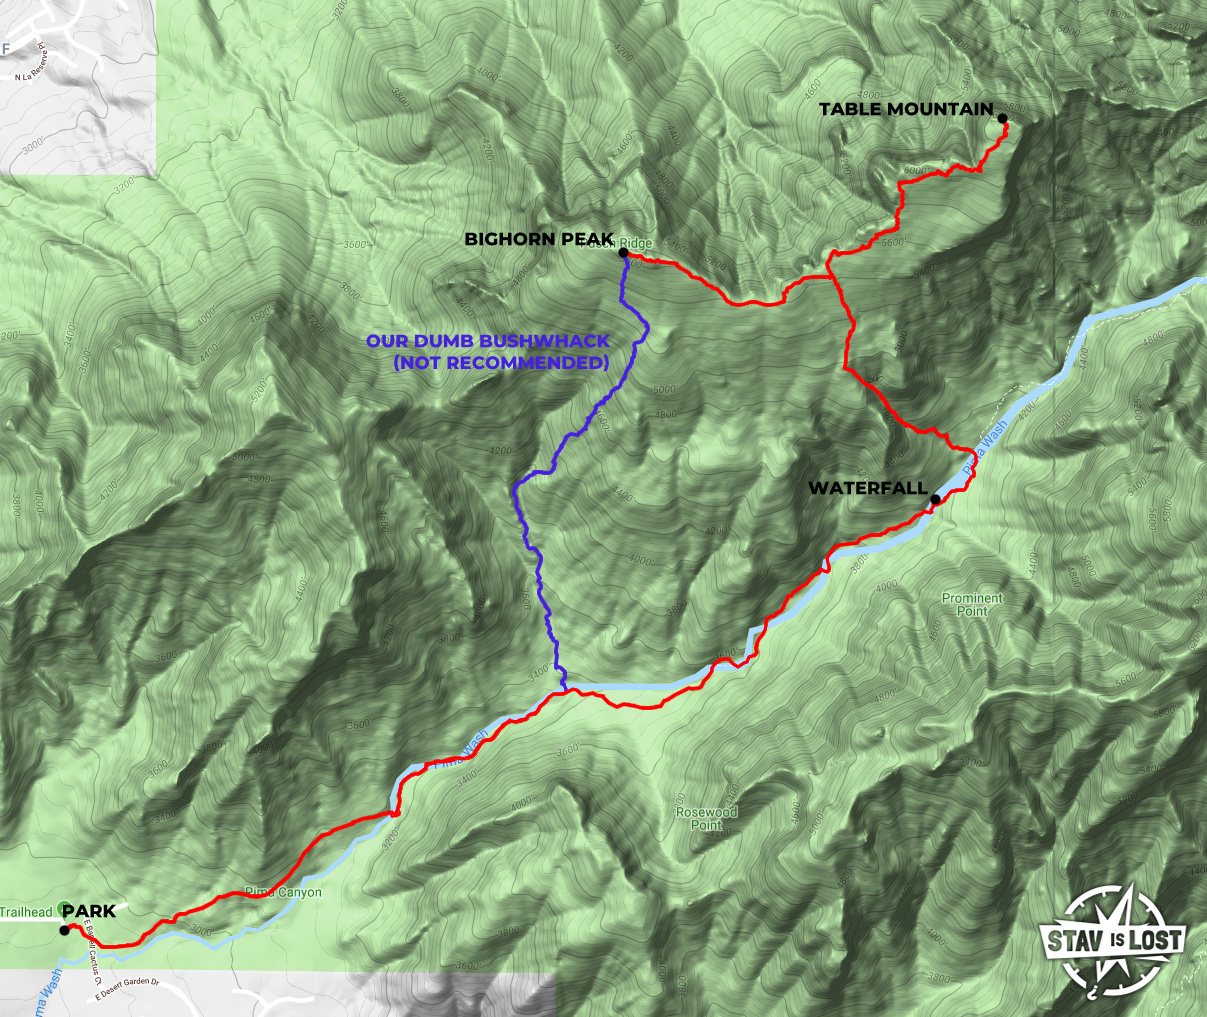 map for Table Mountain and Bighorn Peak via Pima Canyon by stav is lost